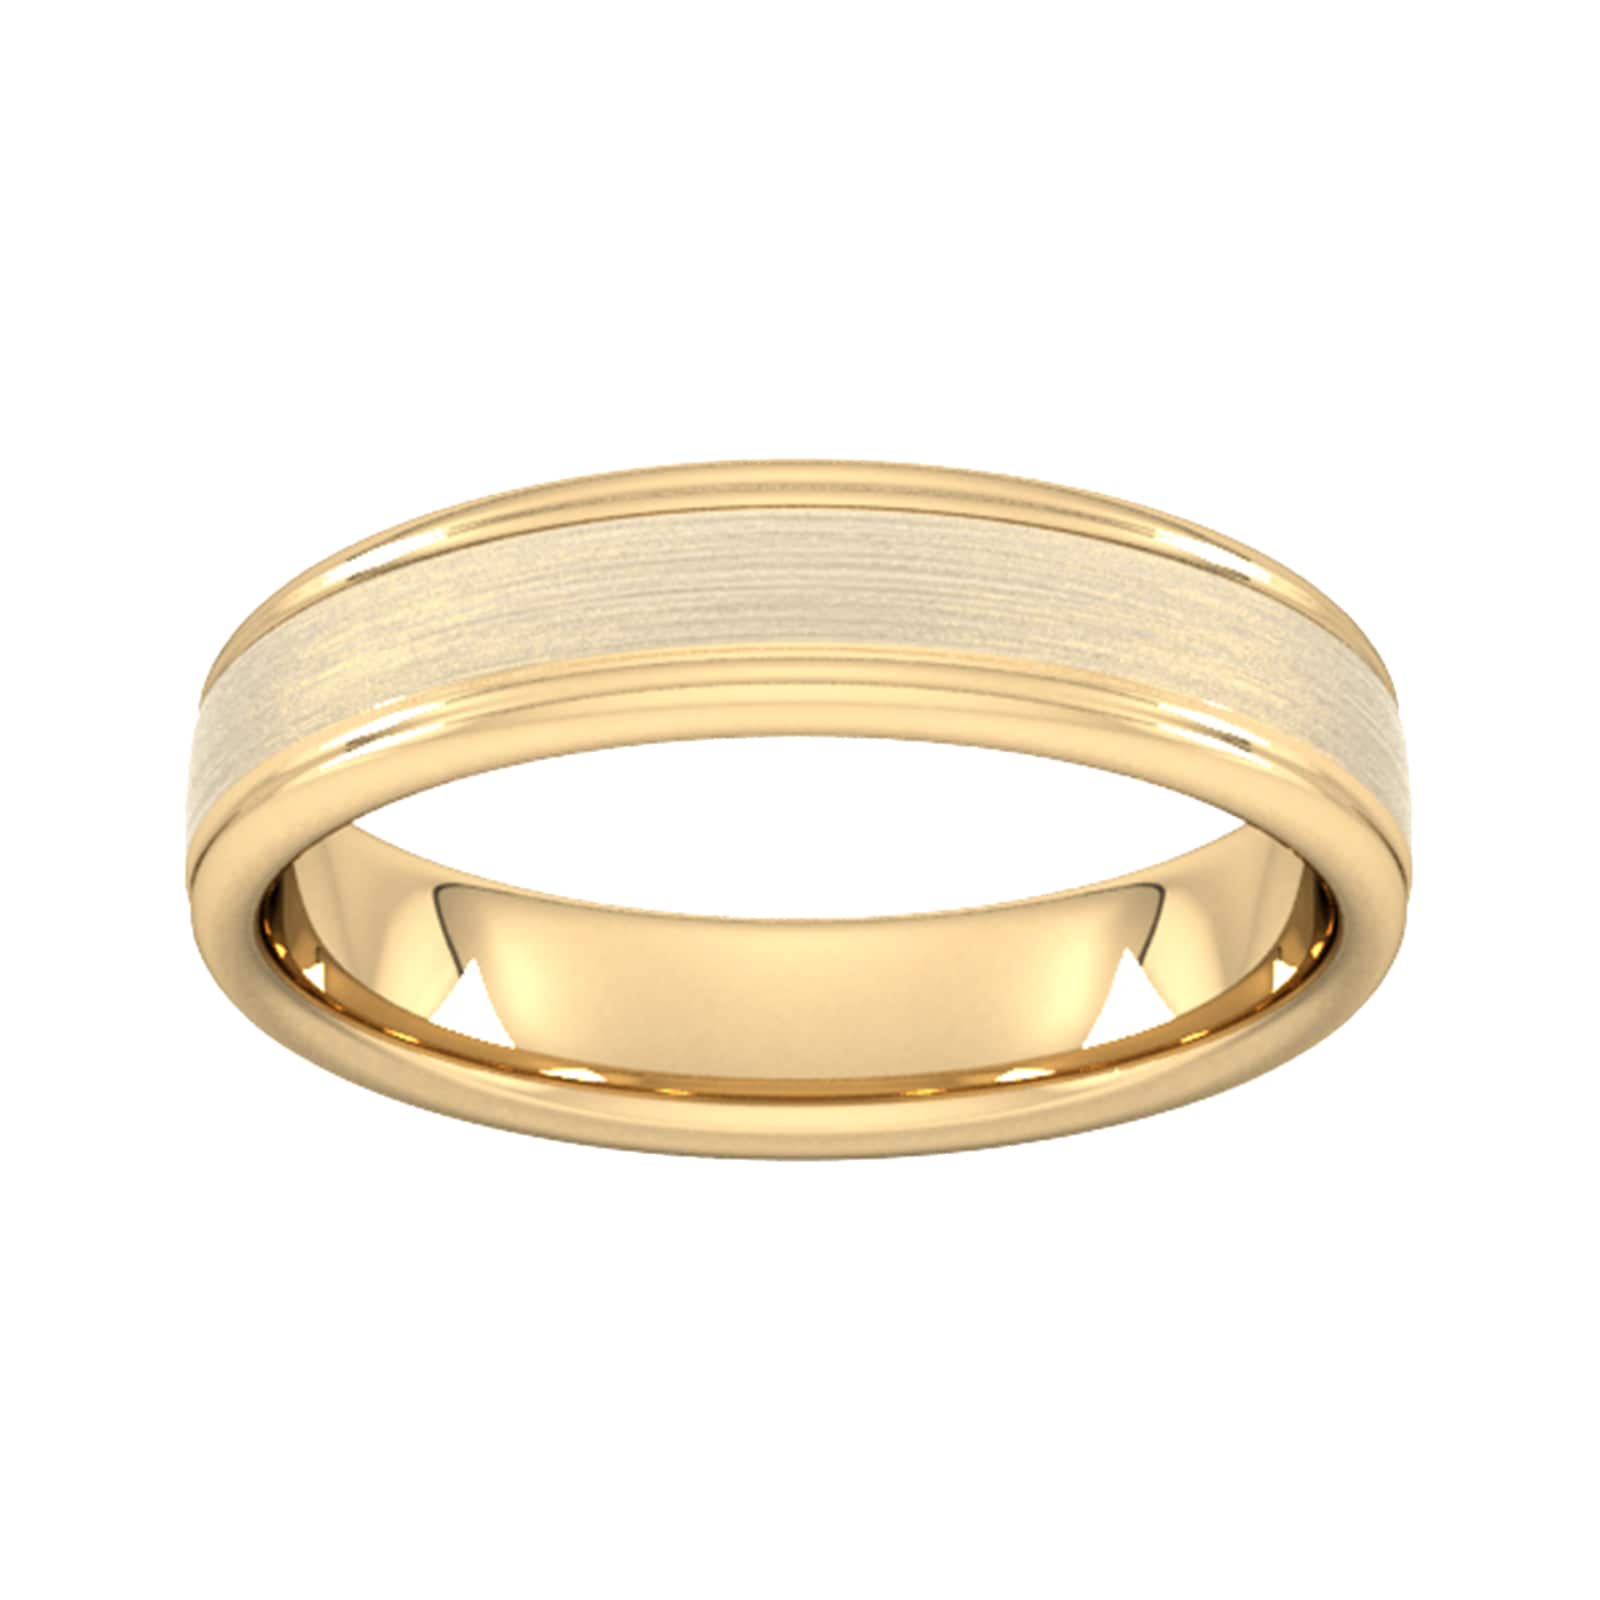 5mm Slight Court Standard Matt Centre With Grooves Wedding Ring In 9 Carat Yellow Gold - Ring Size W